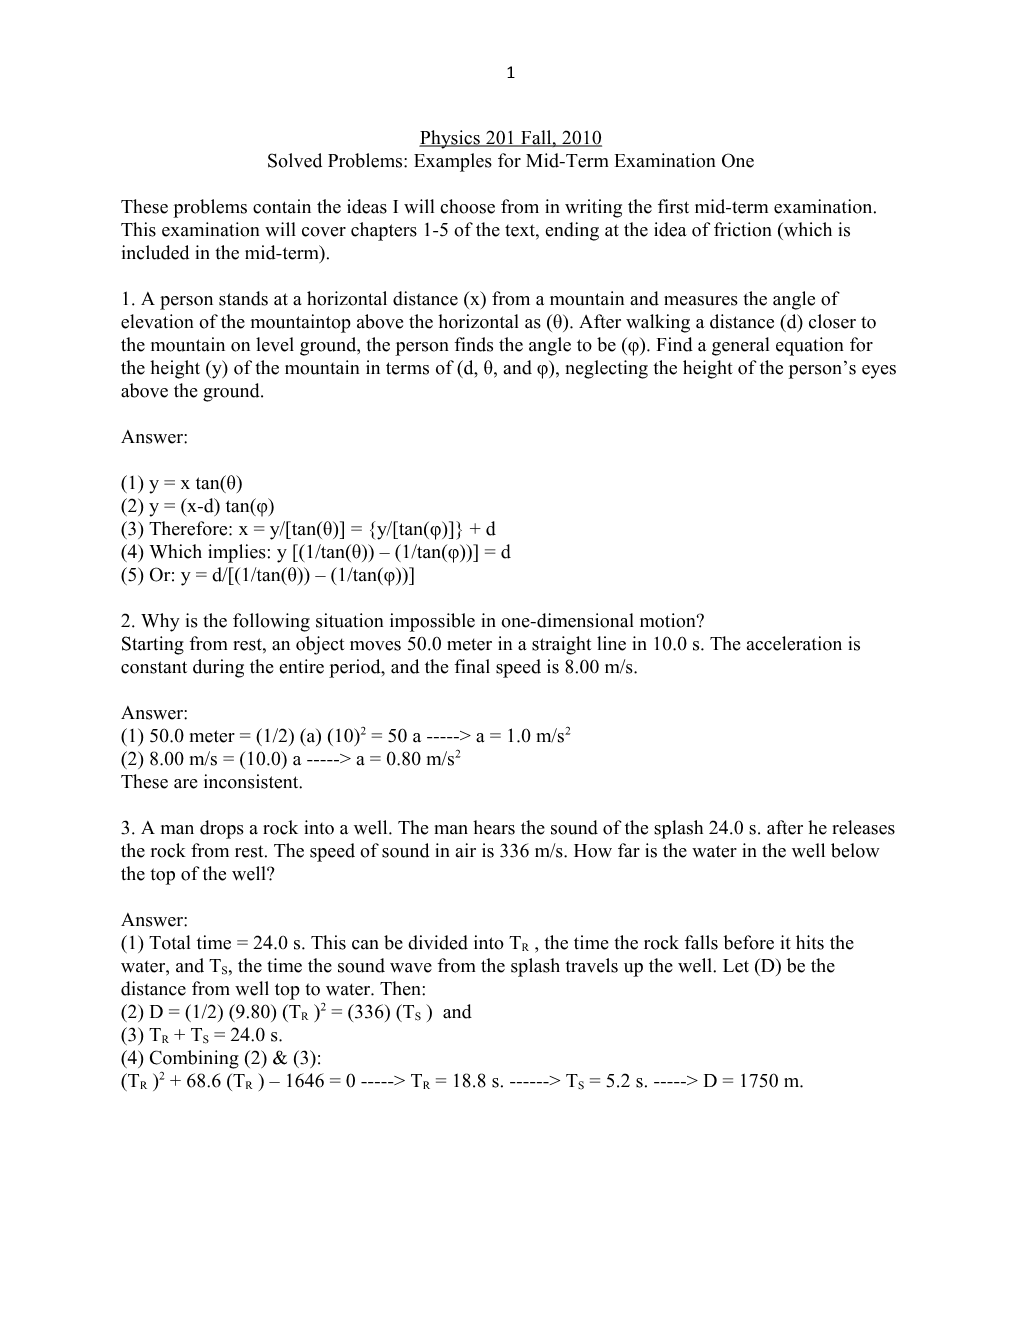 Solved Problems: Examples for Mid-Term Examination One